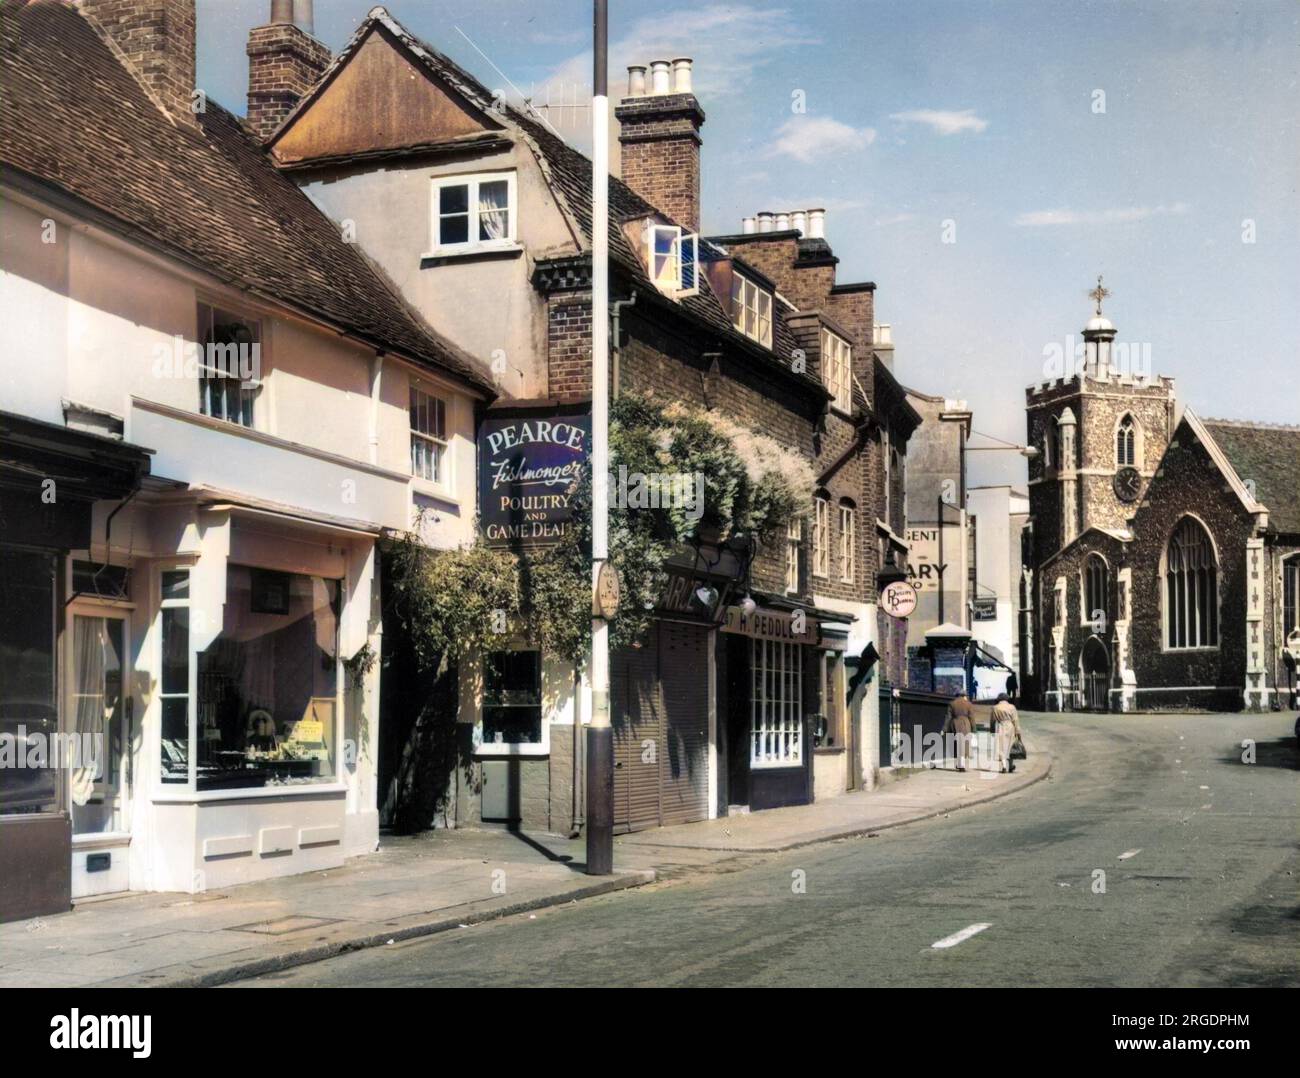 A picturesque corner of Vine Street, Uxbridge, in the London Borough of Hillingdon, England showing a glimpse of a parade of shops and the parish church. Stock Photo